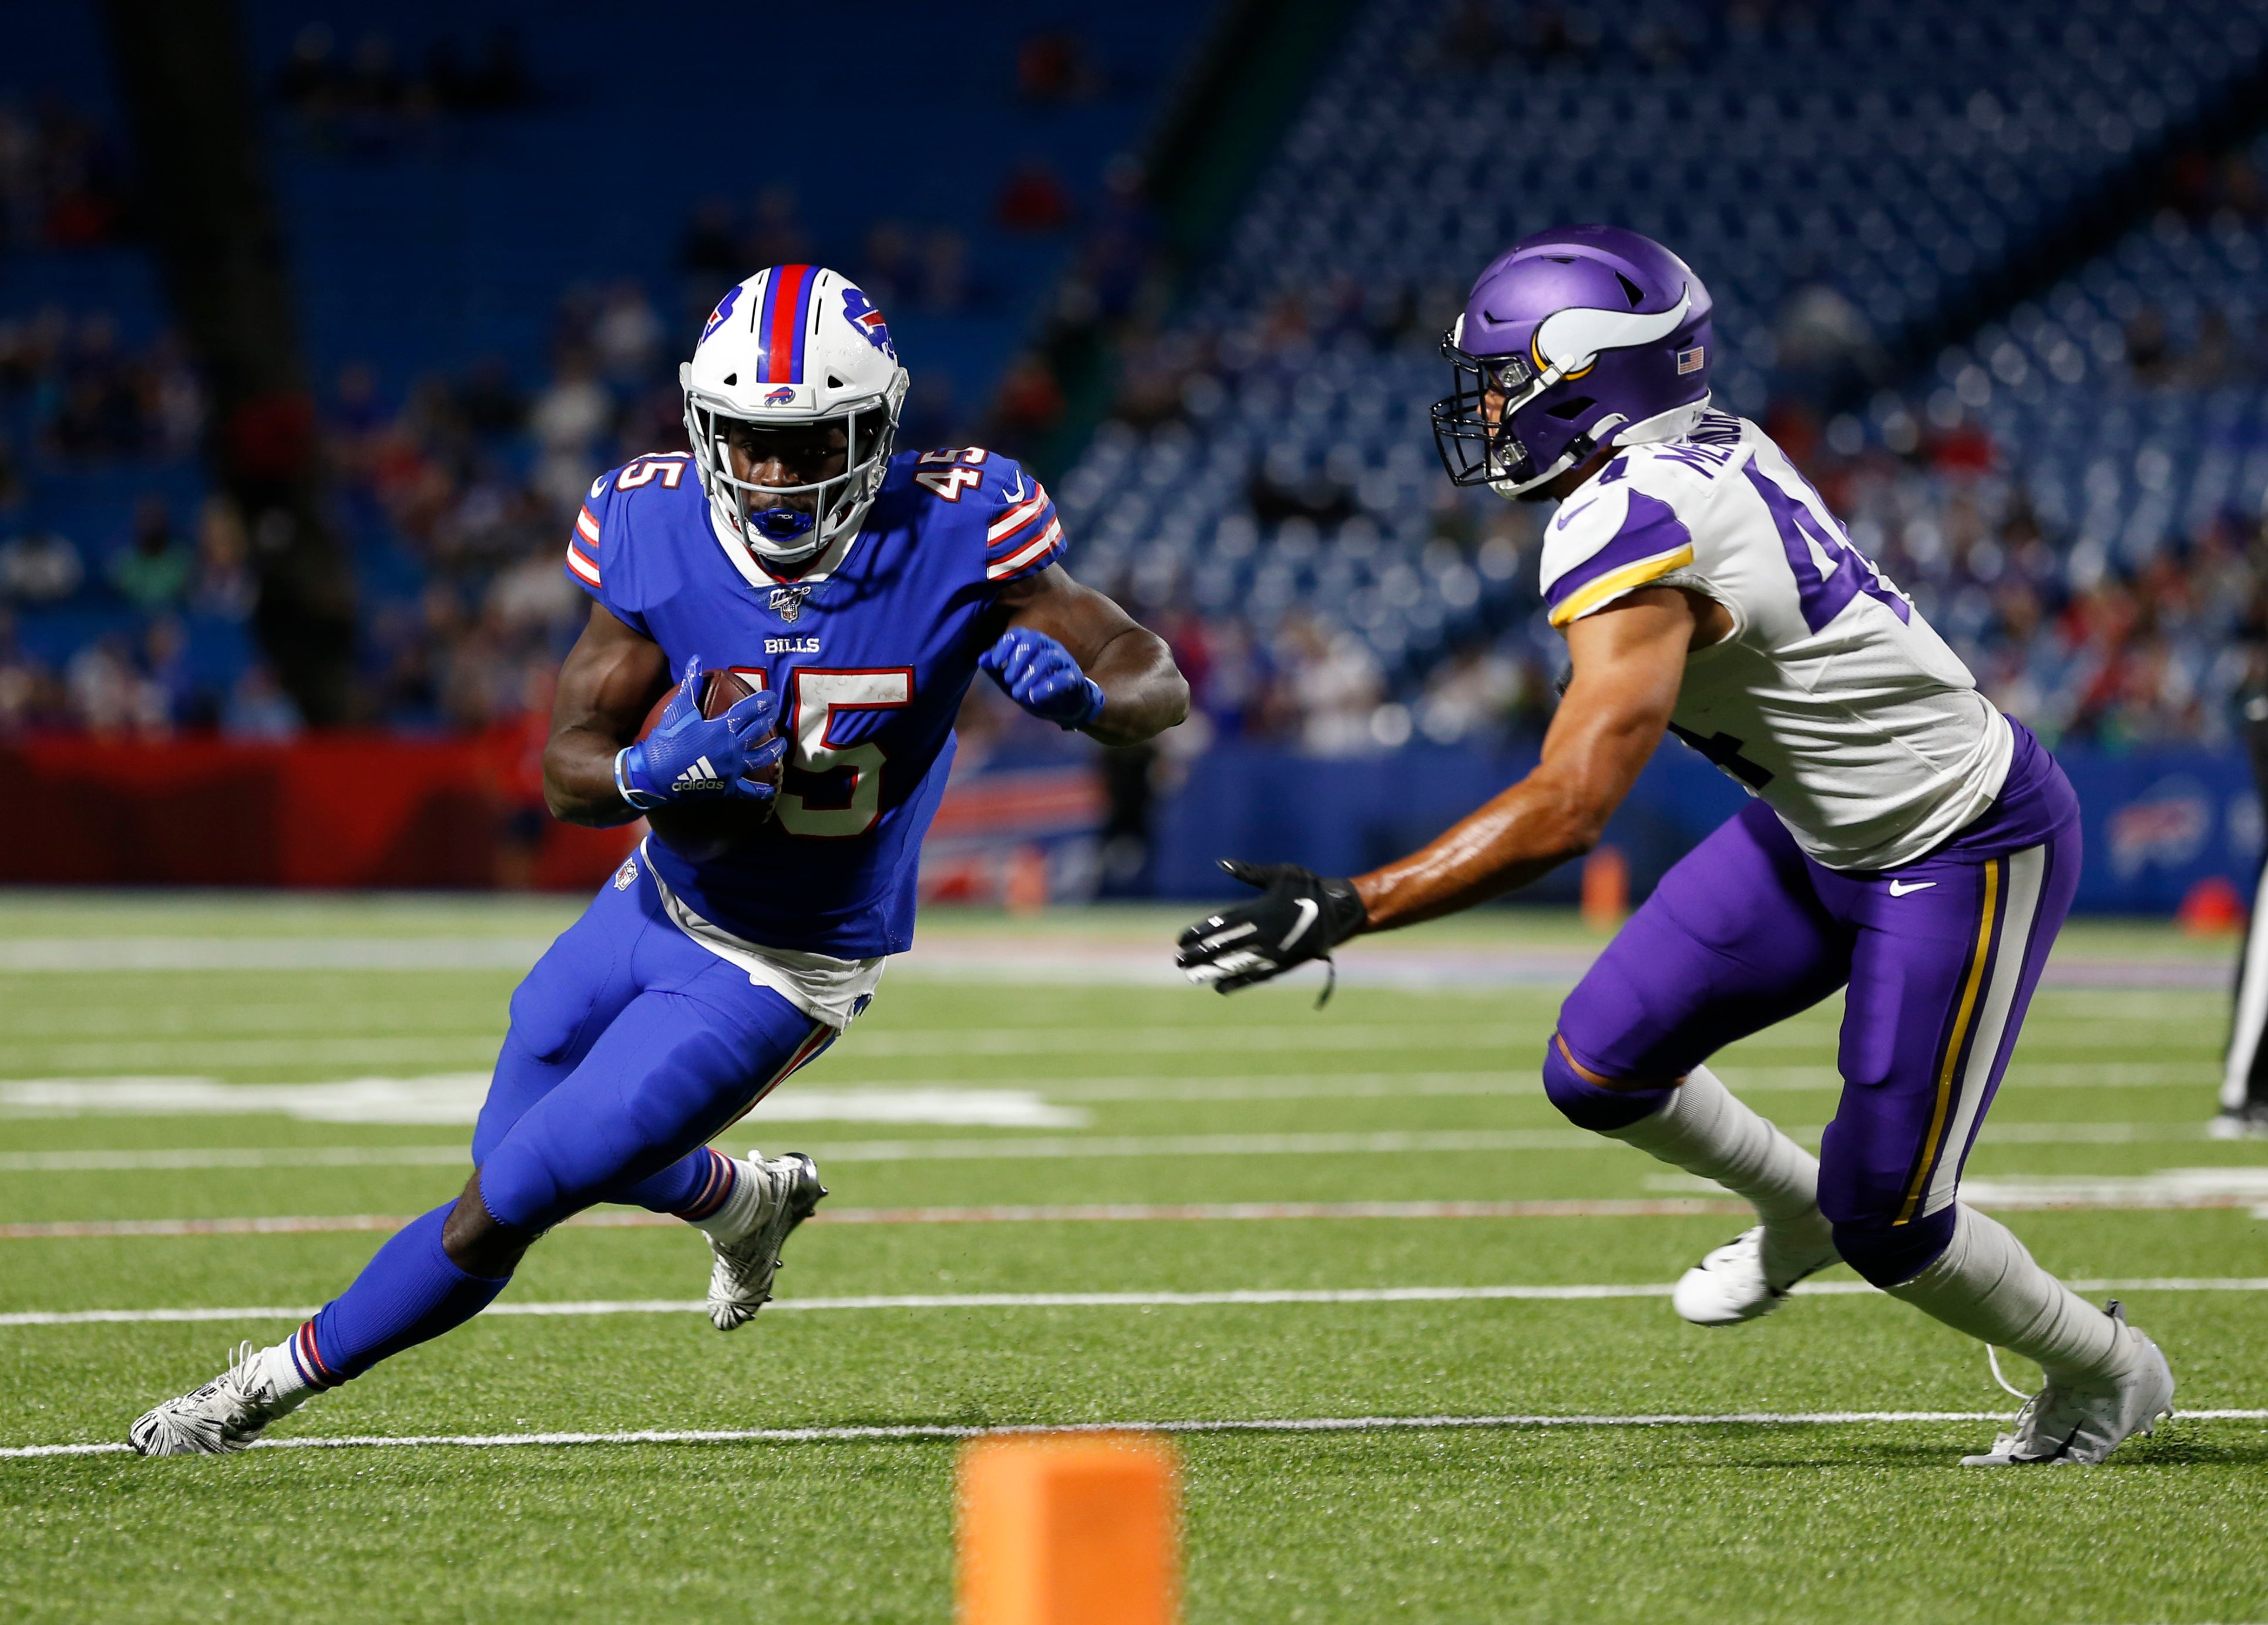 Christian Wade’s NFL dream ended without a regular-season appearance for the Buffalo Bills